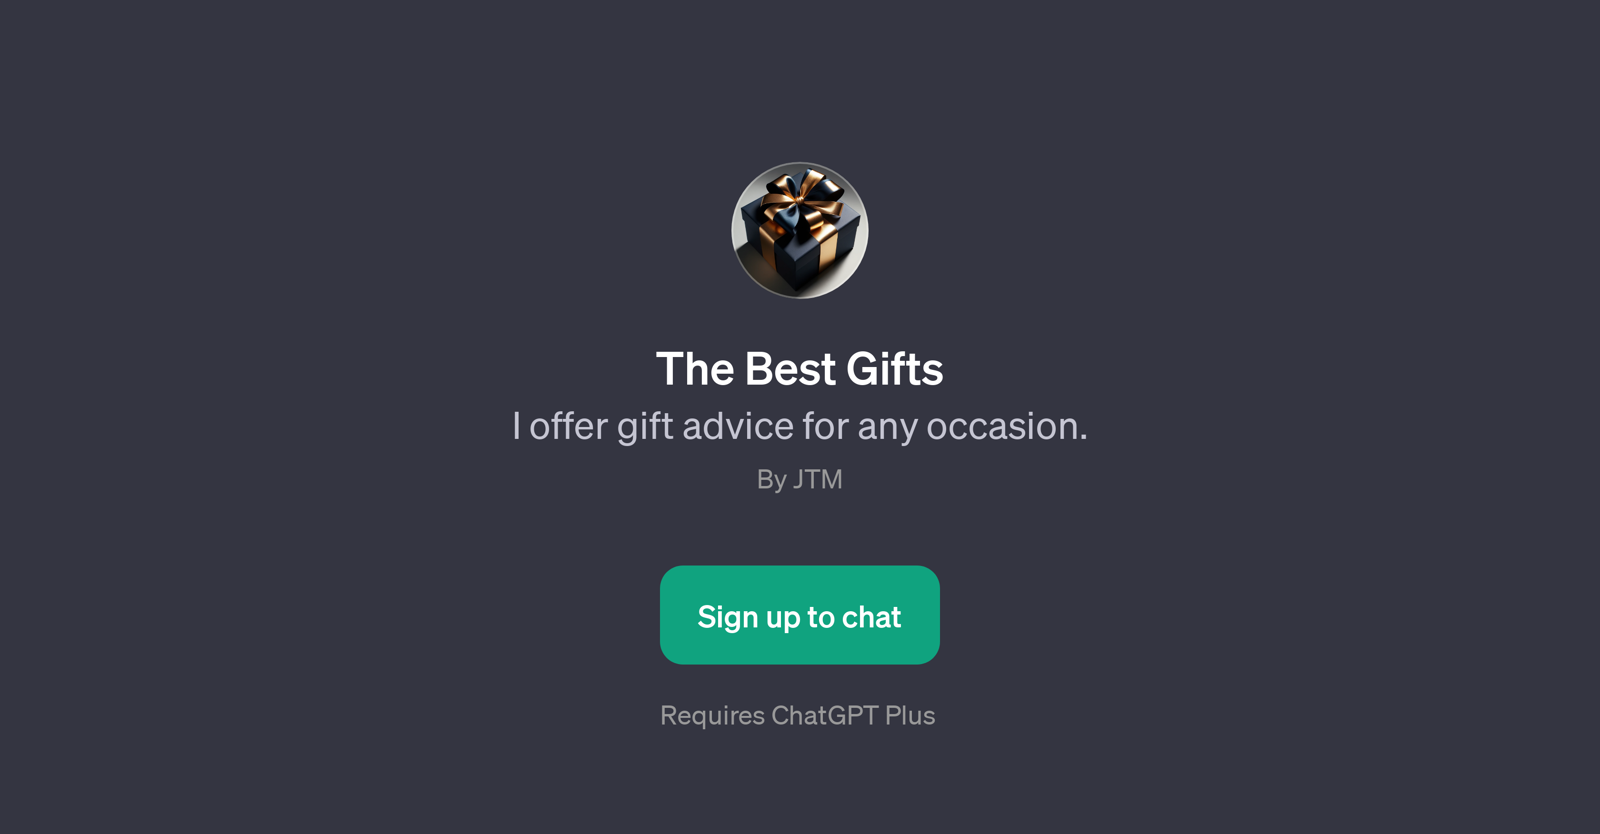 The Best Gifts website